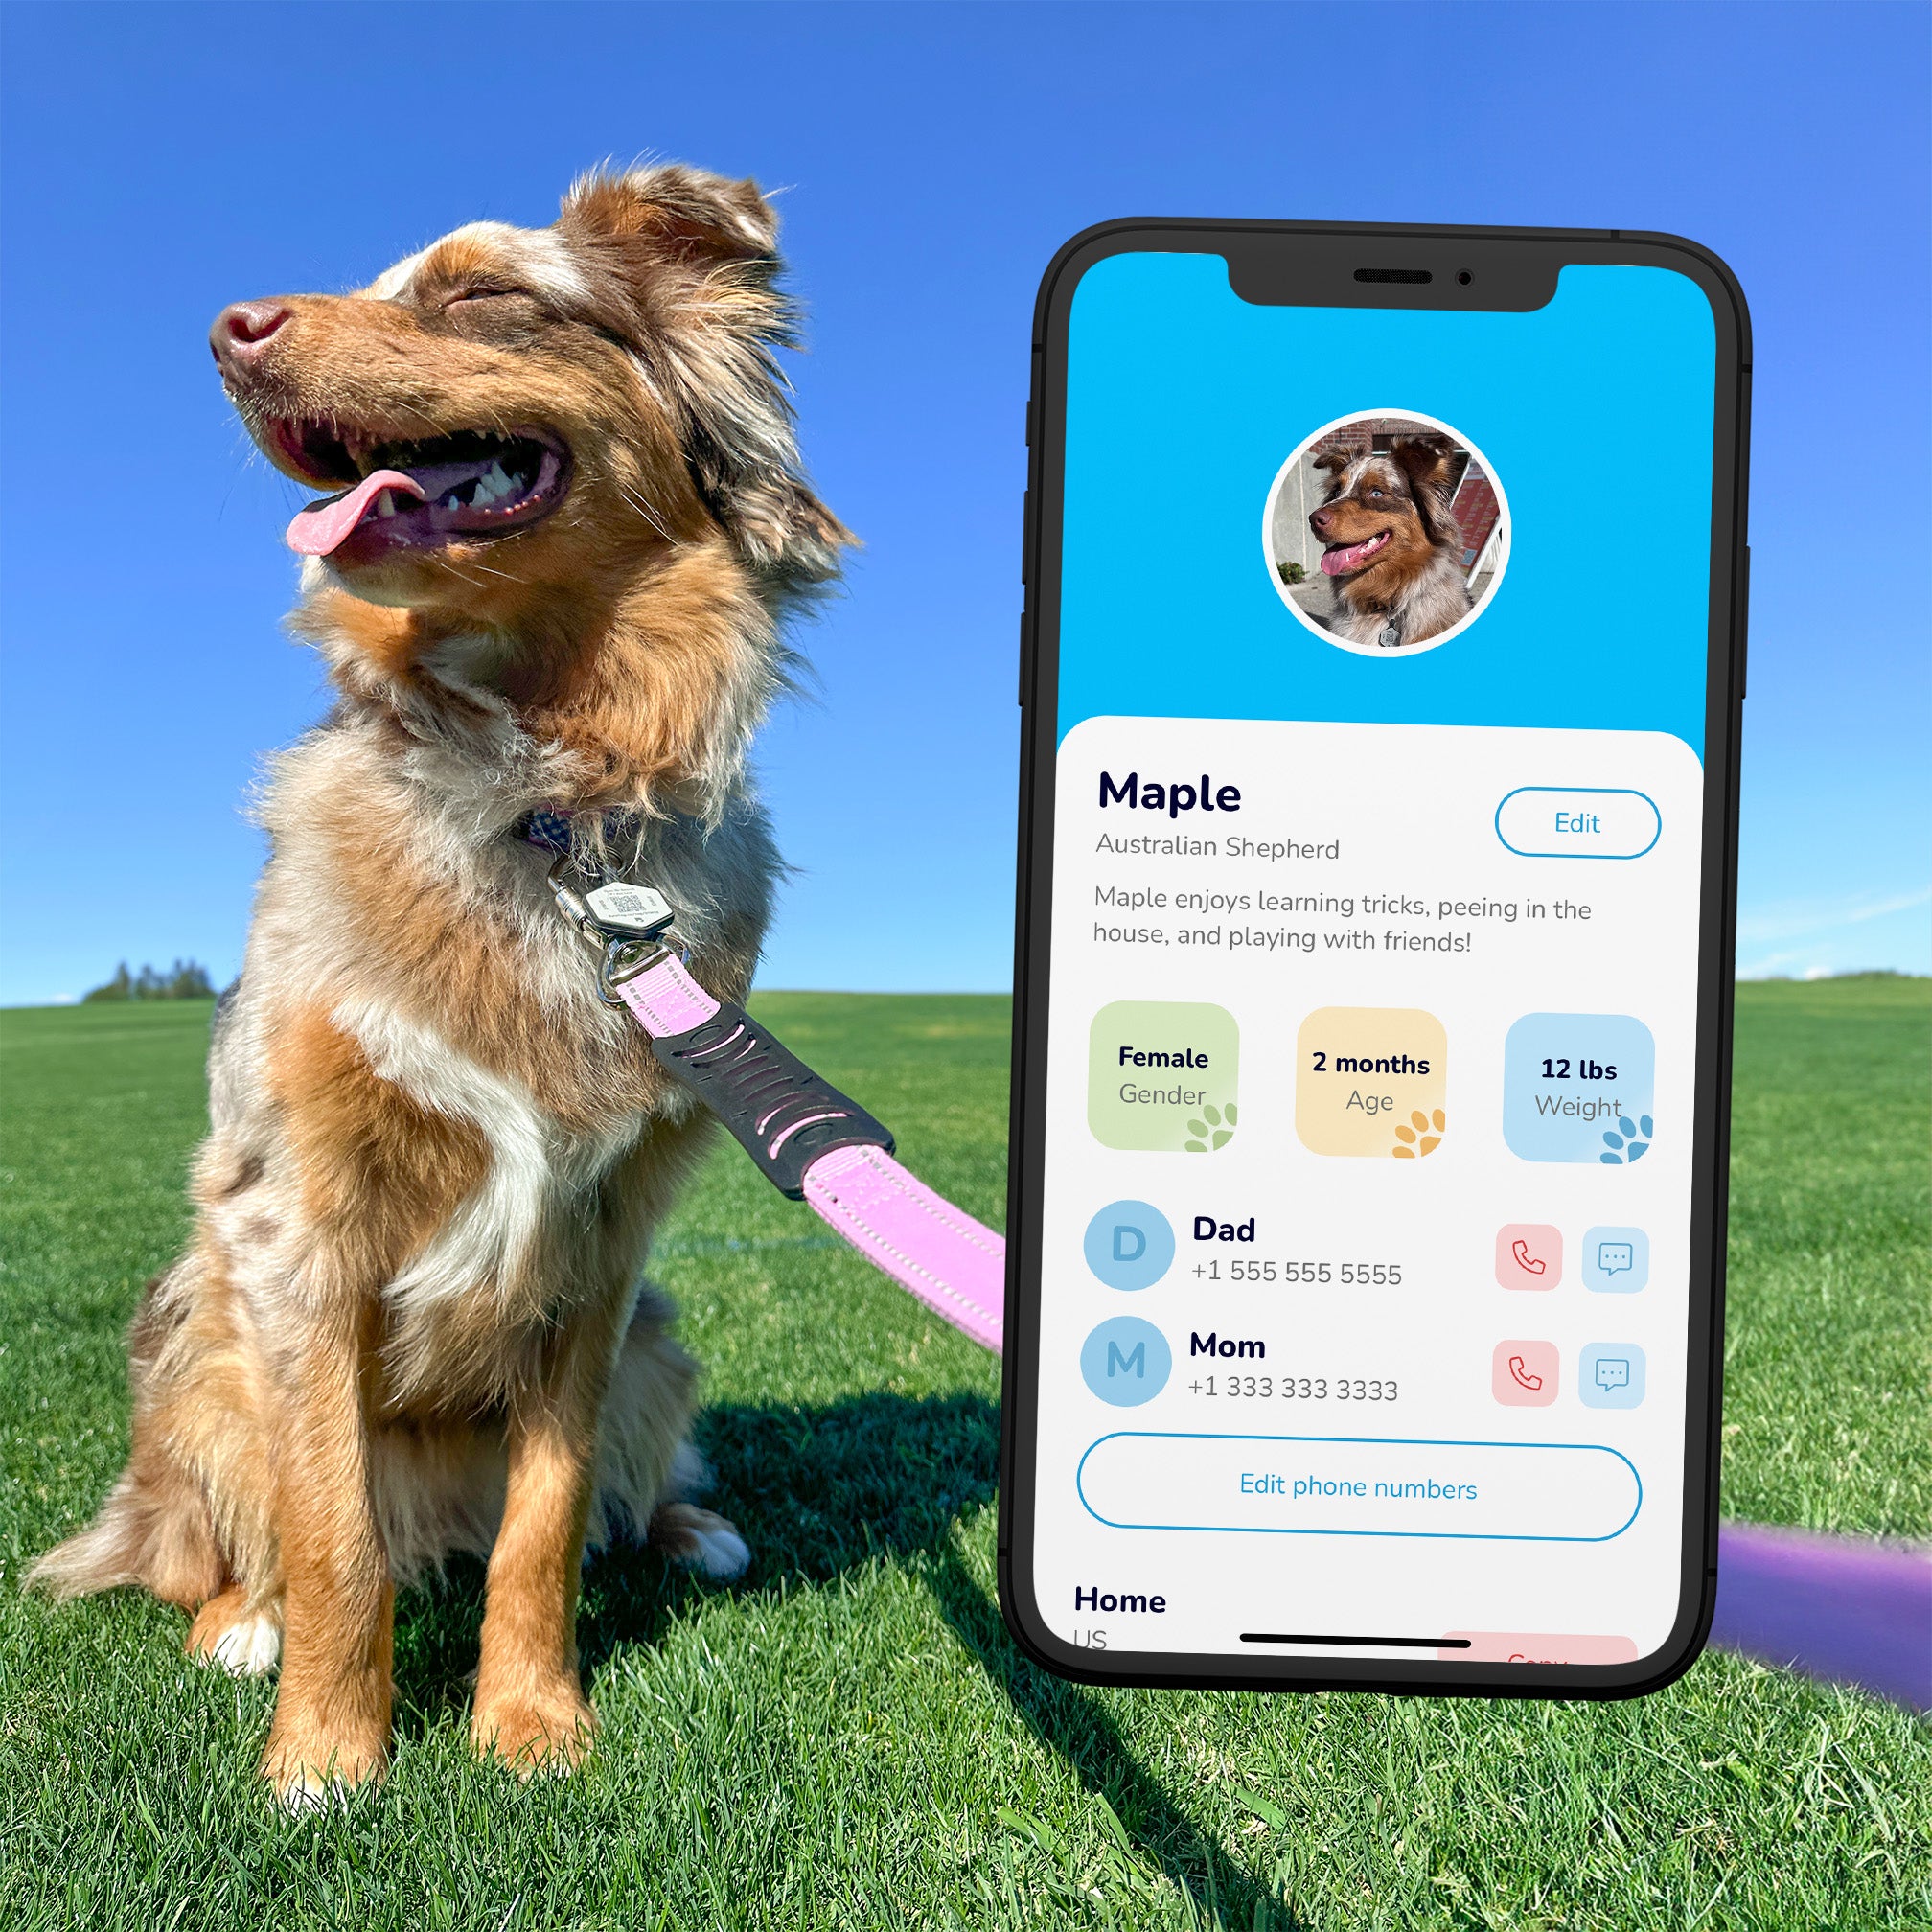 Australian shepherd wearing ByteTag with pet profile featured next to her.